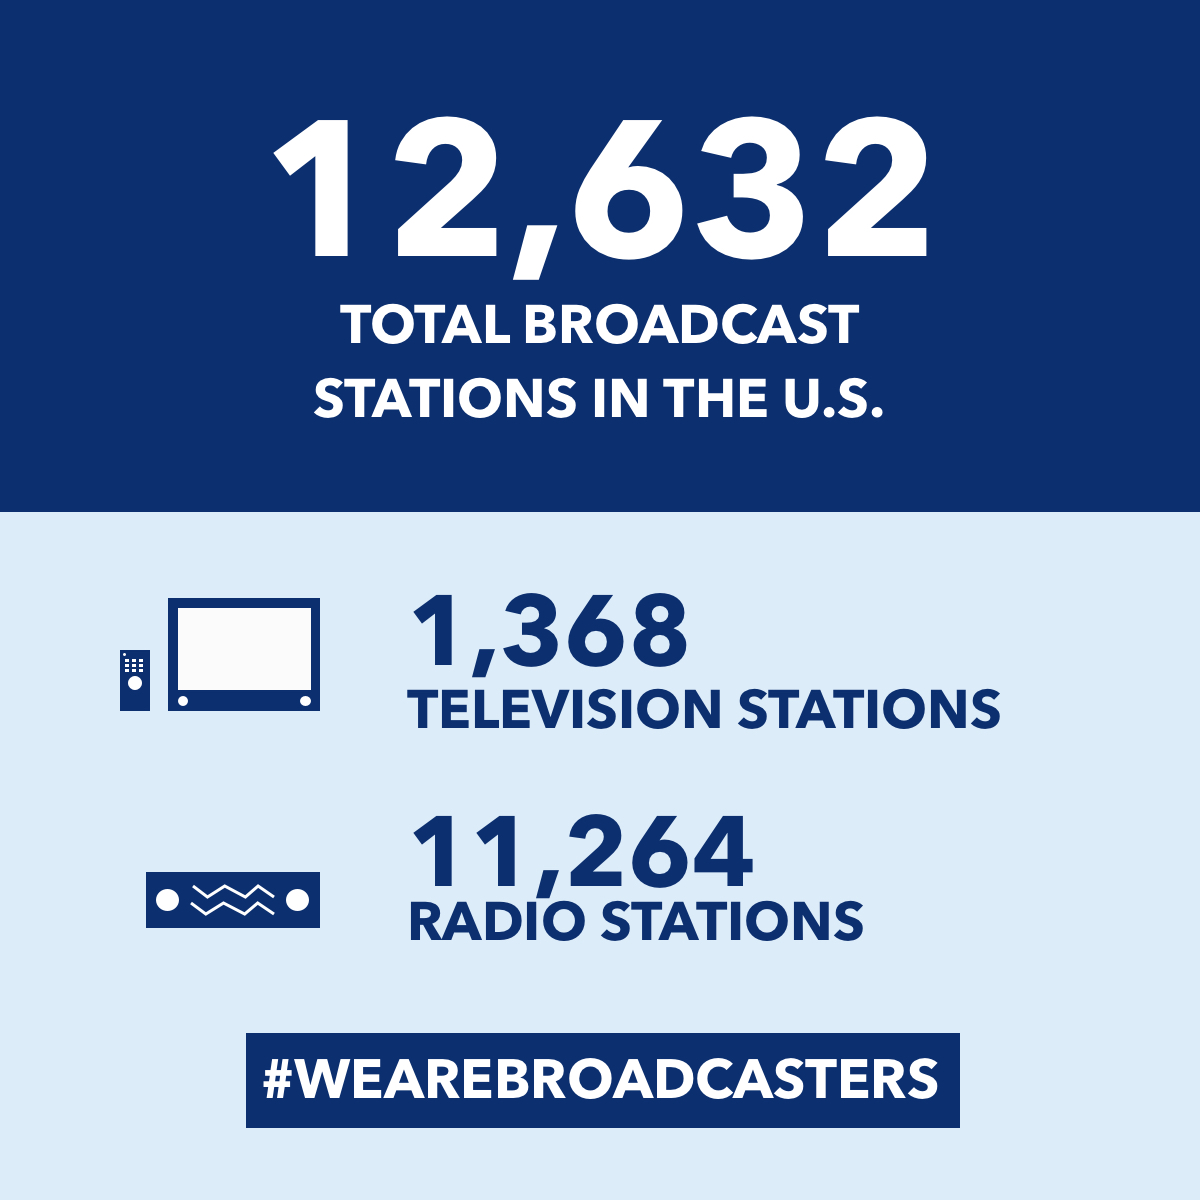 17,254 total broadcast stations in the US